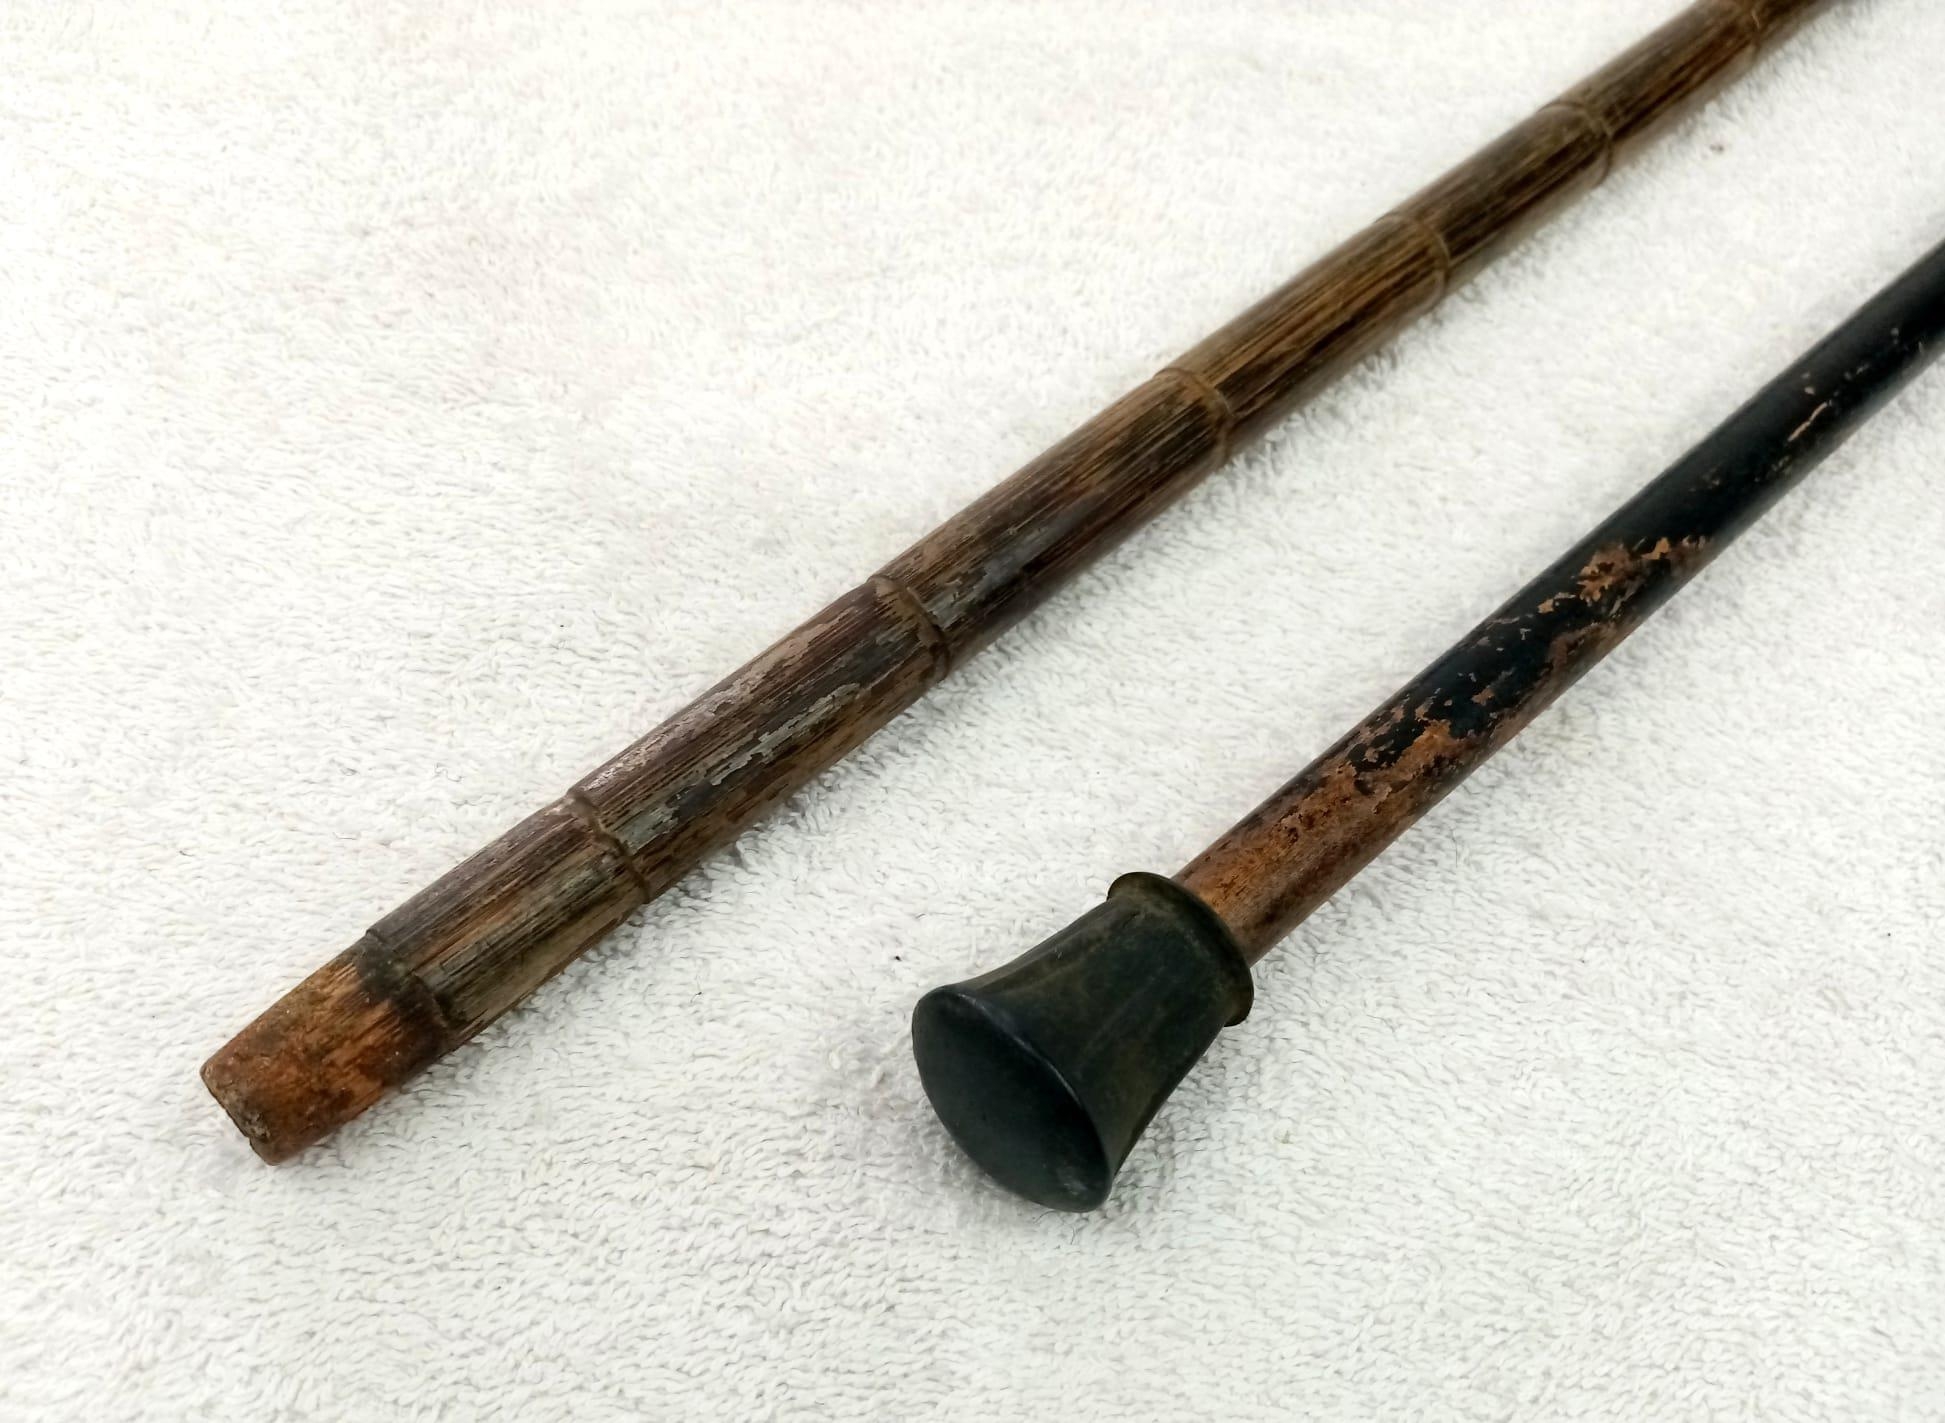 Two Antique Wooden, Ladies Walking Sticks - Both with Silver band decoration near the handle. 90cm. - Image 3 of 3